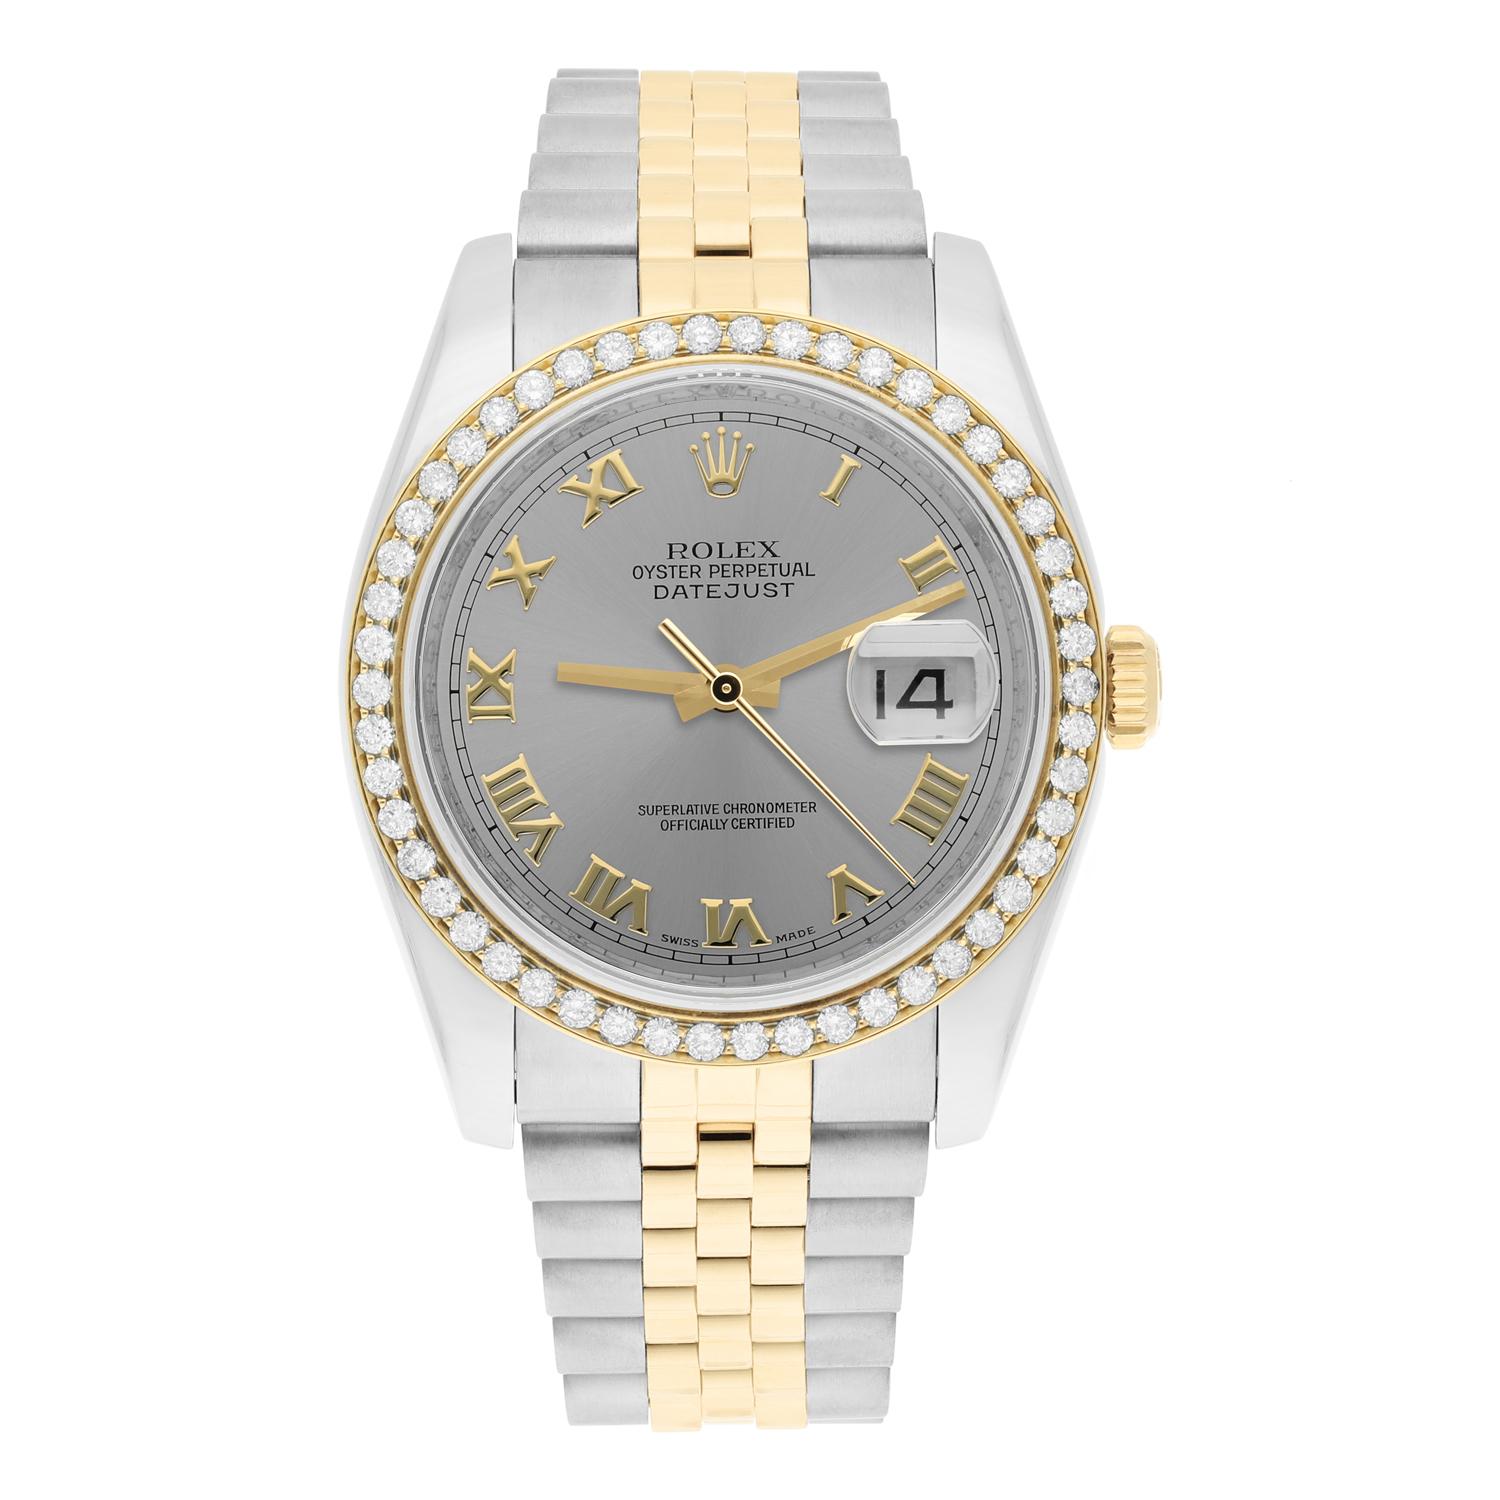 This watch has been professionally polished, serviced and is in excellent overall condition. There are absolutely no visible scratches or blemishes. Authenticity guaranteed! Diamond bezel 18K gold plated, custom diamond set. Diamonds are 100%